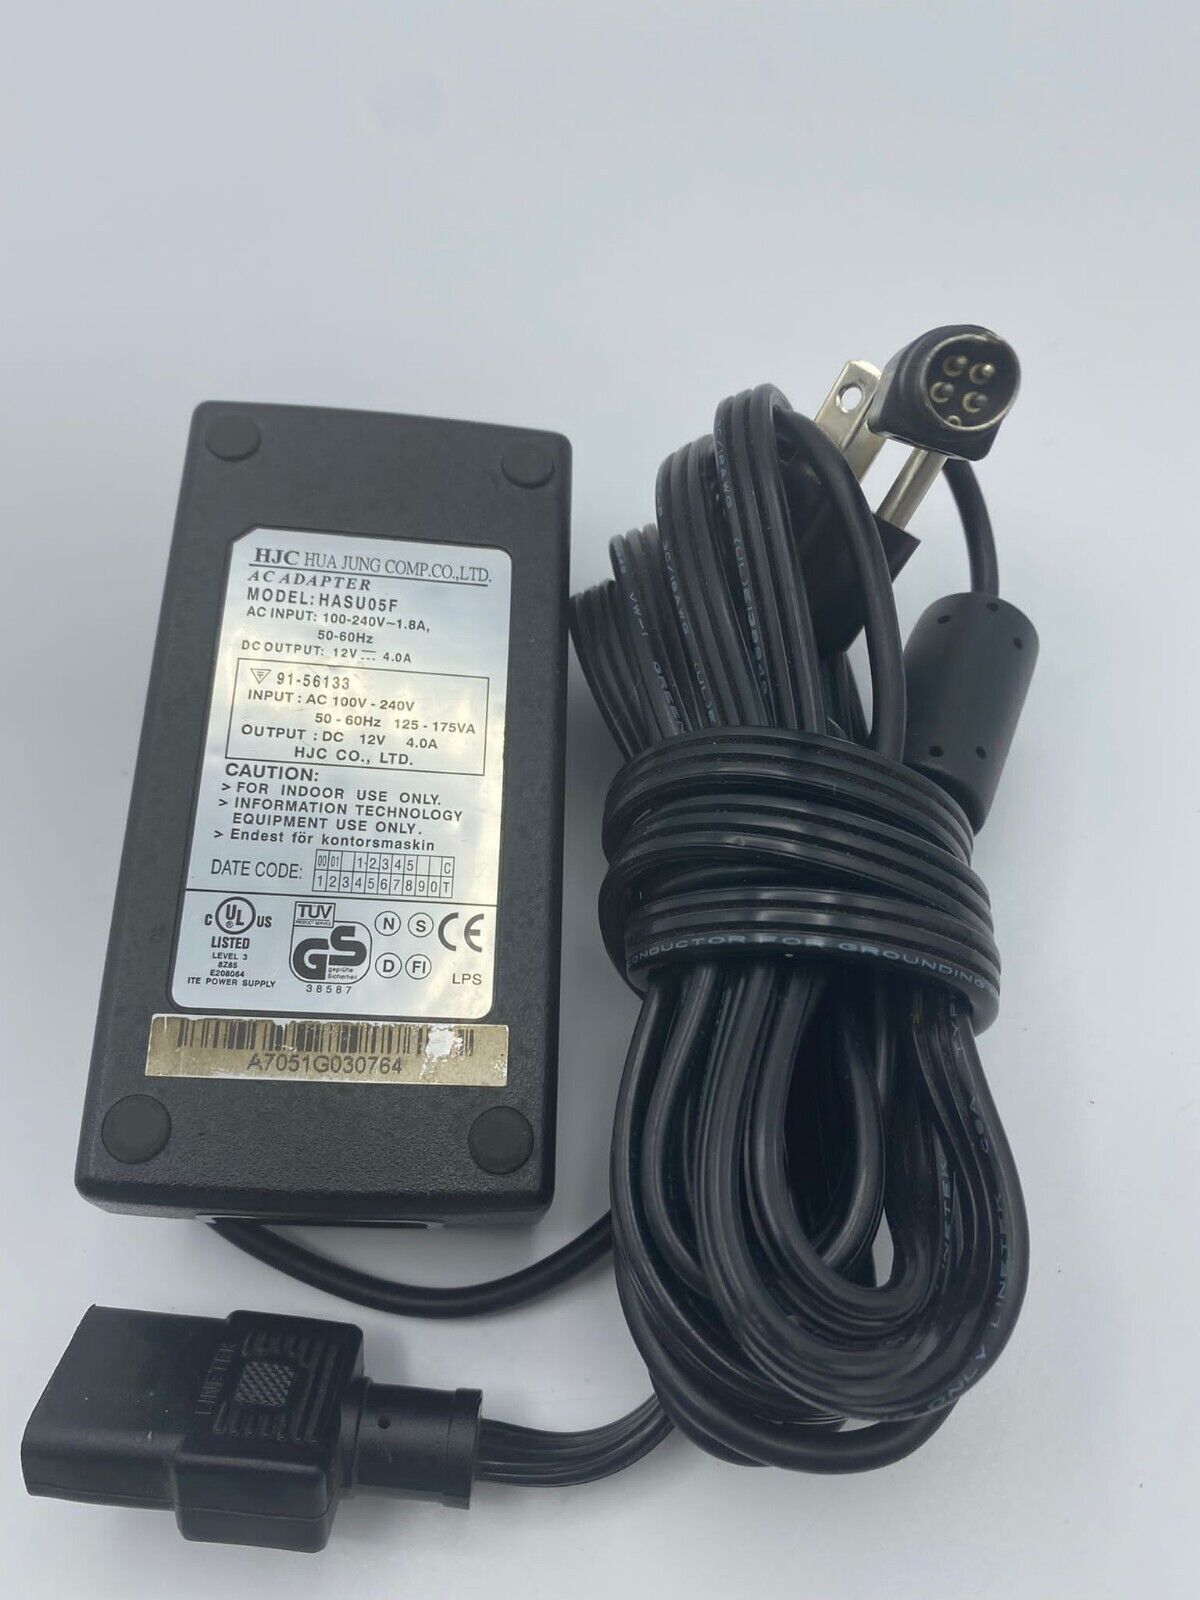 brand new HJC HASU05F AC Power Supply Adapter Charger Output 12V 4.0A 12 Volts 4 Pin Brand: HJC Type: Adapter Connec